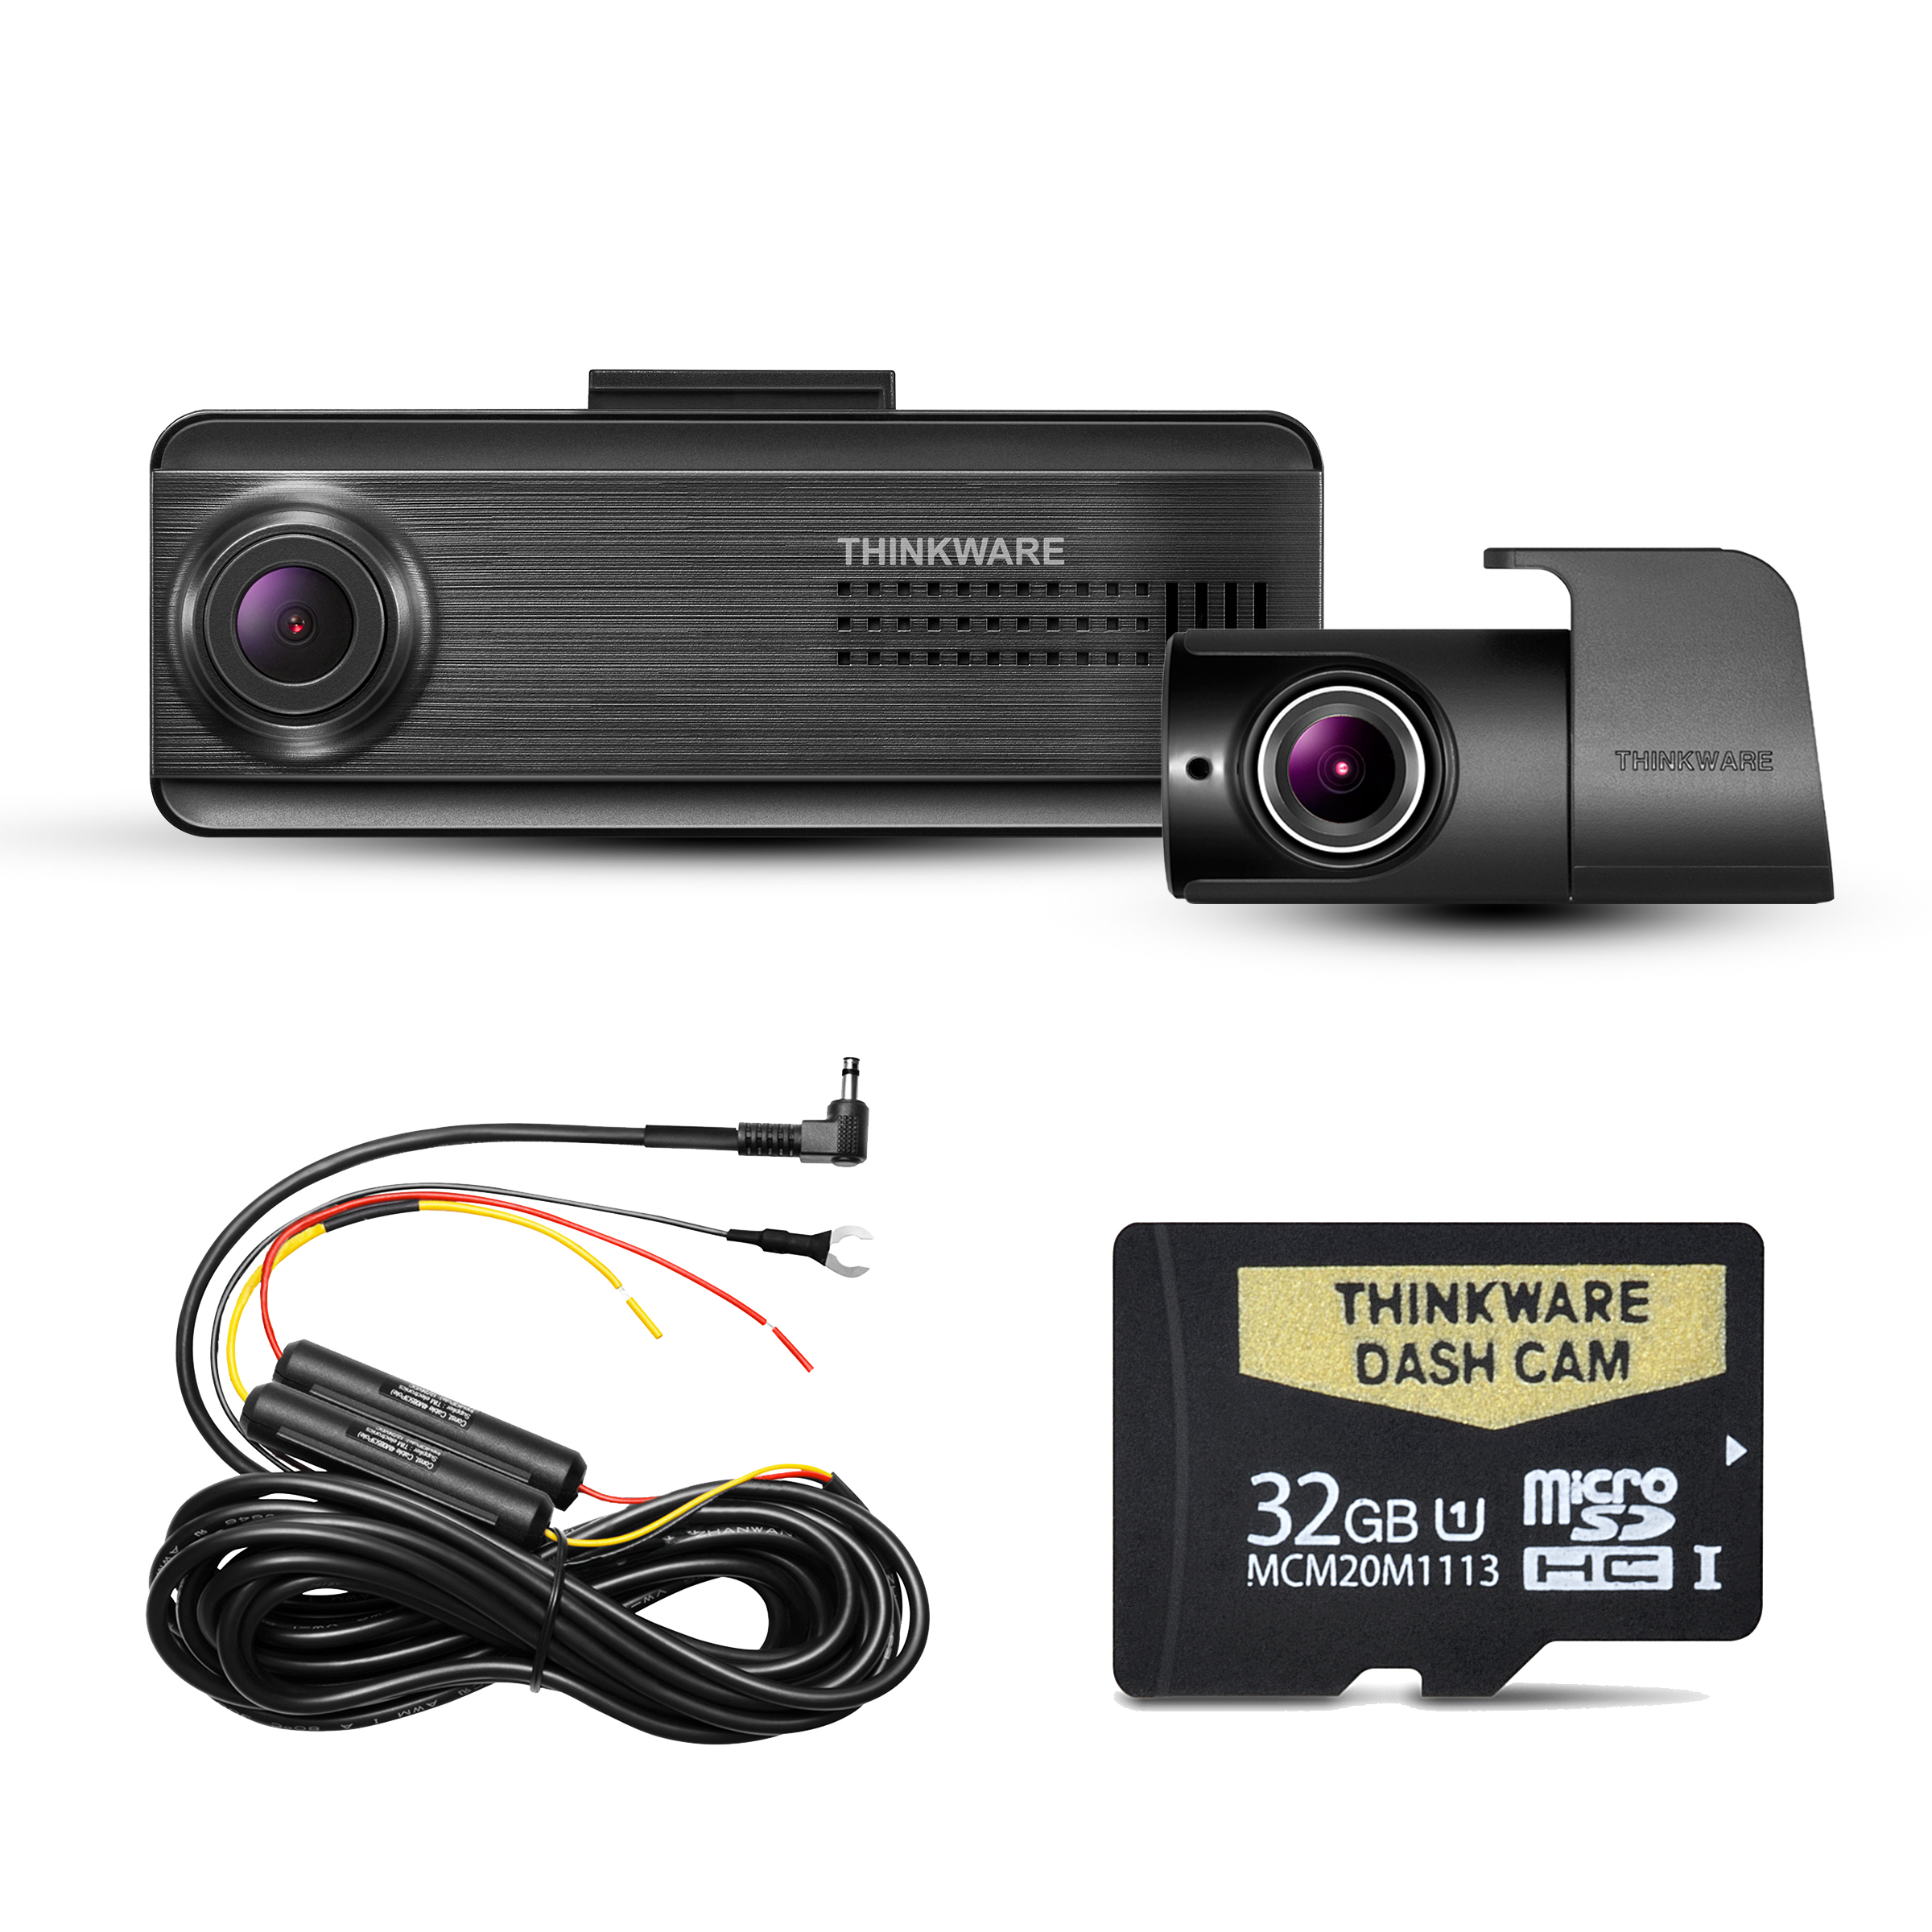 Thinkware F200 Front and Rear Dashcam inc memory card and harwire kit built in